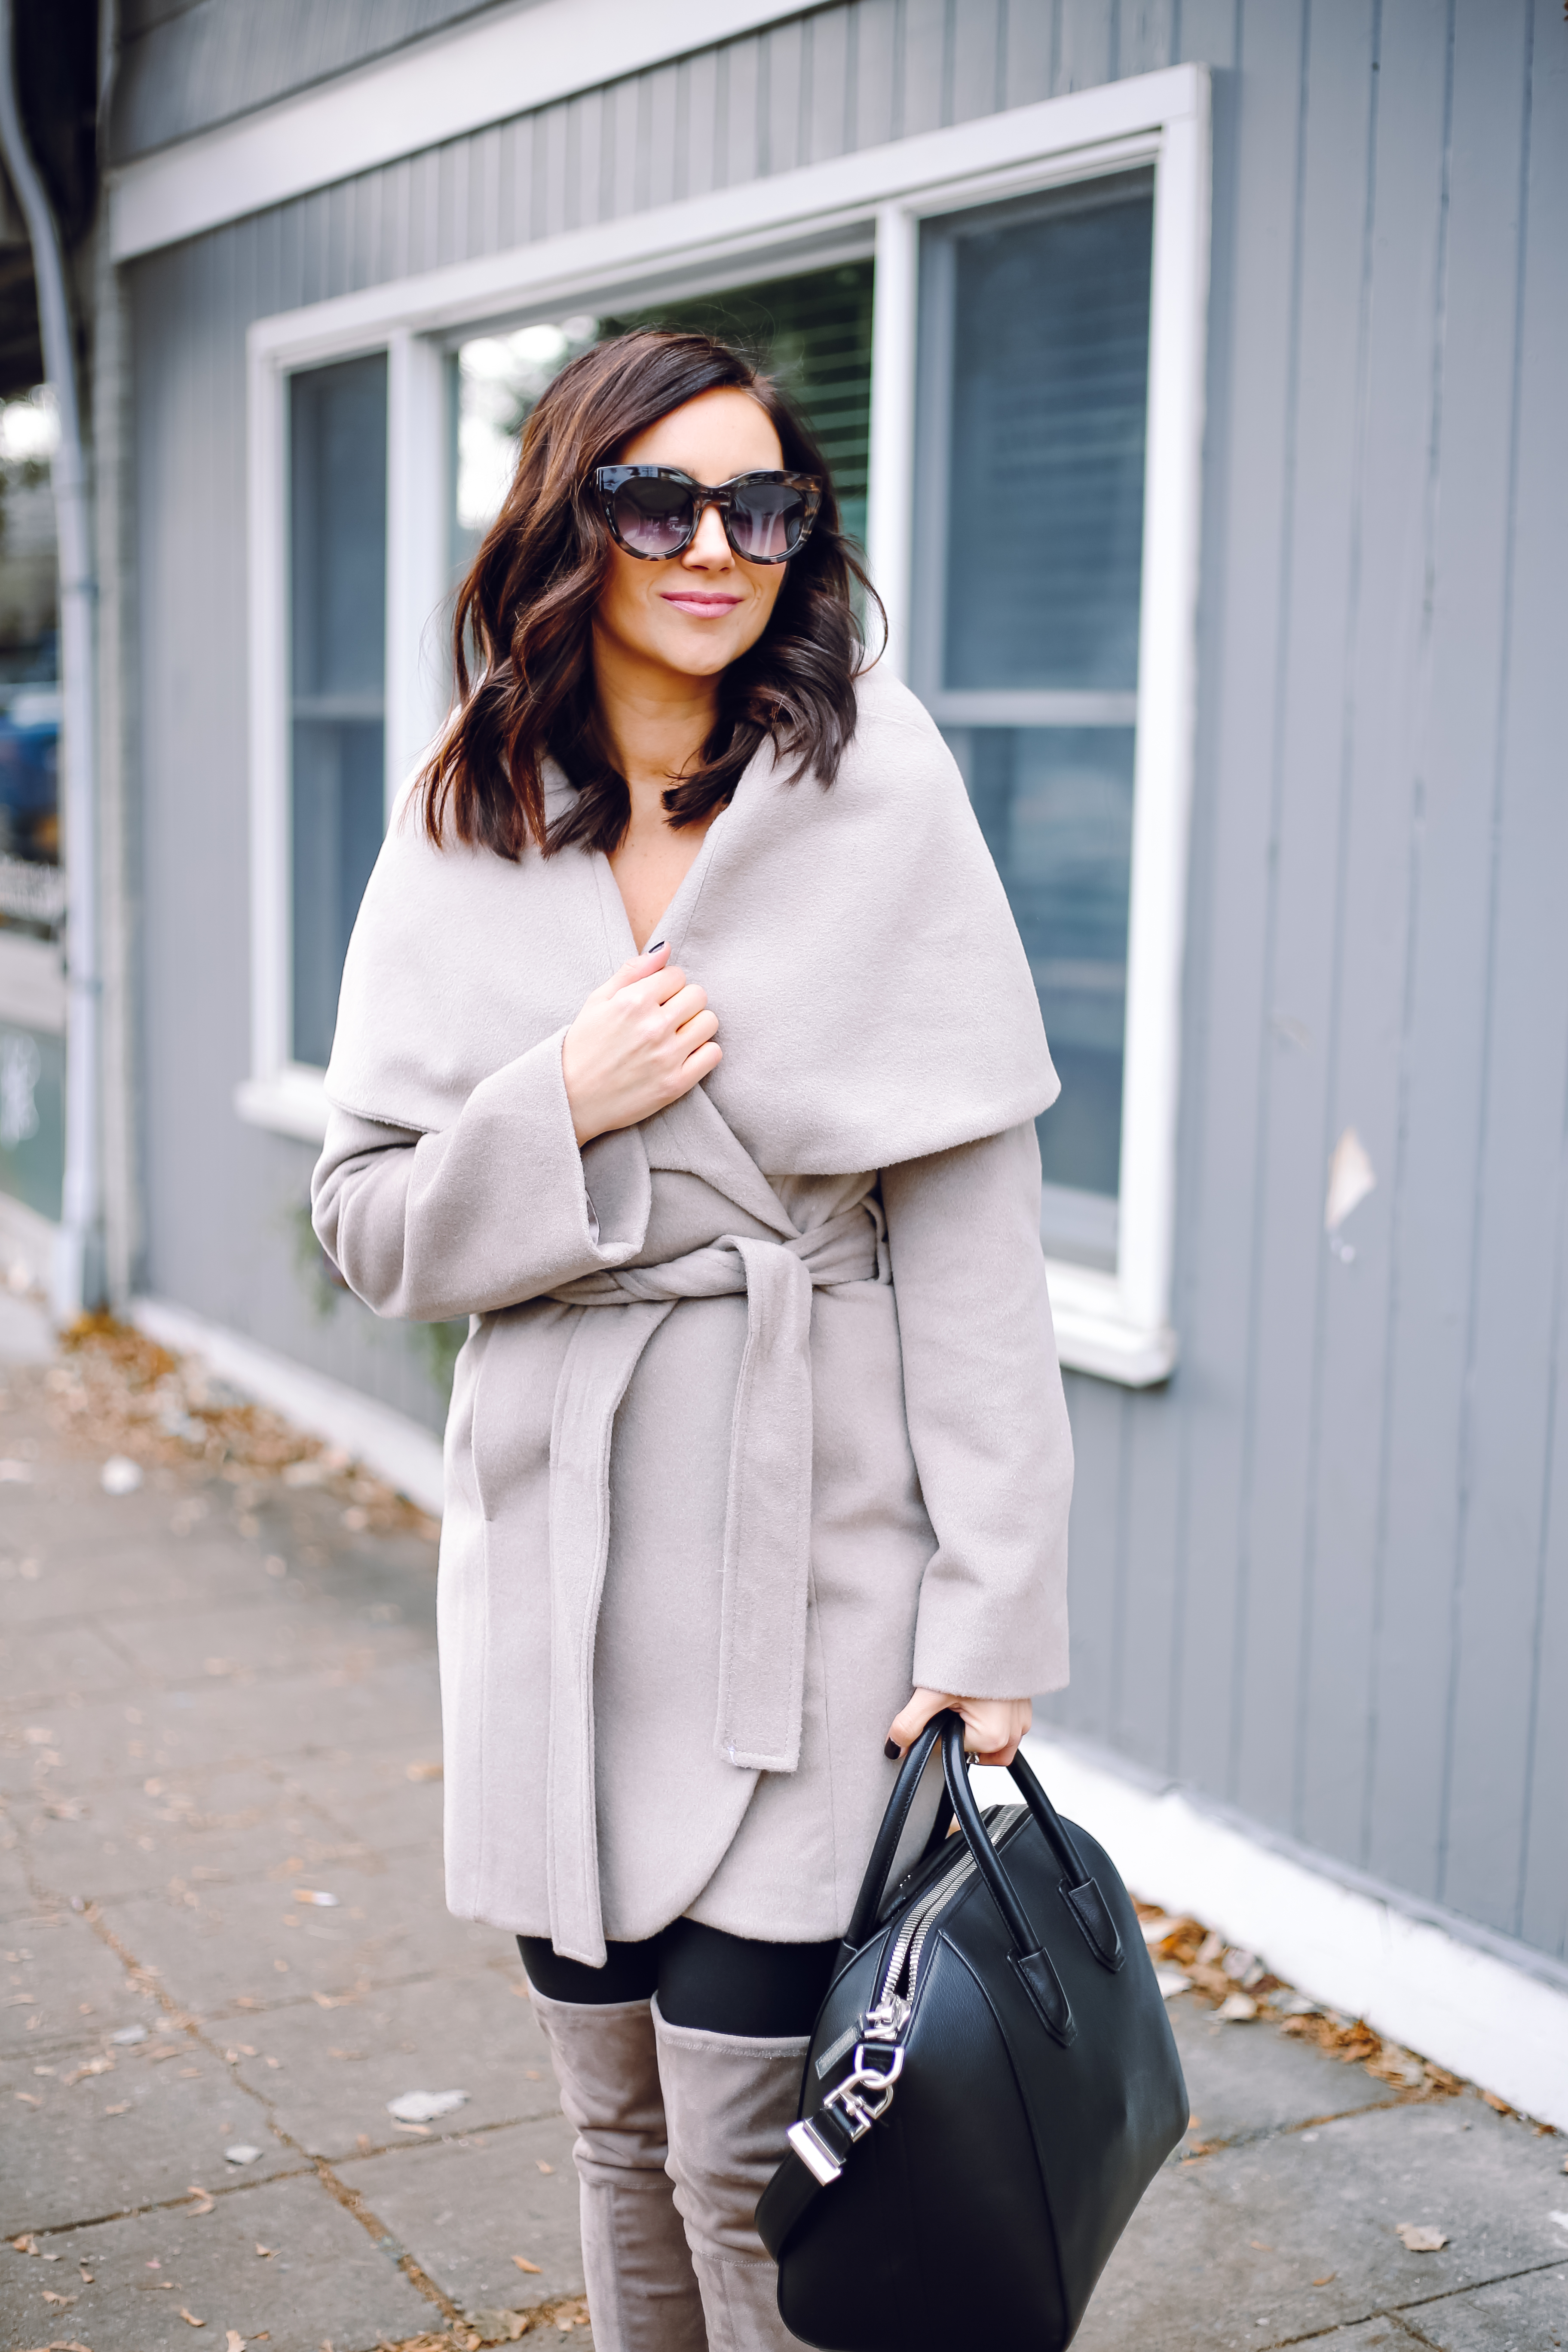 Black Friday Sale with Nordstrom - Blushing Rose Style Blog